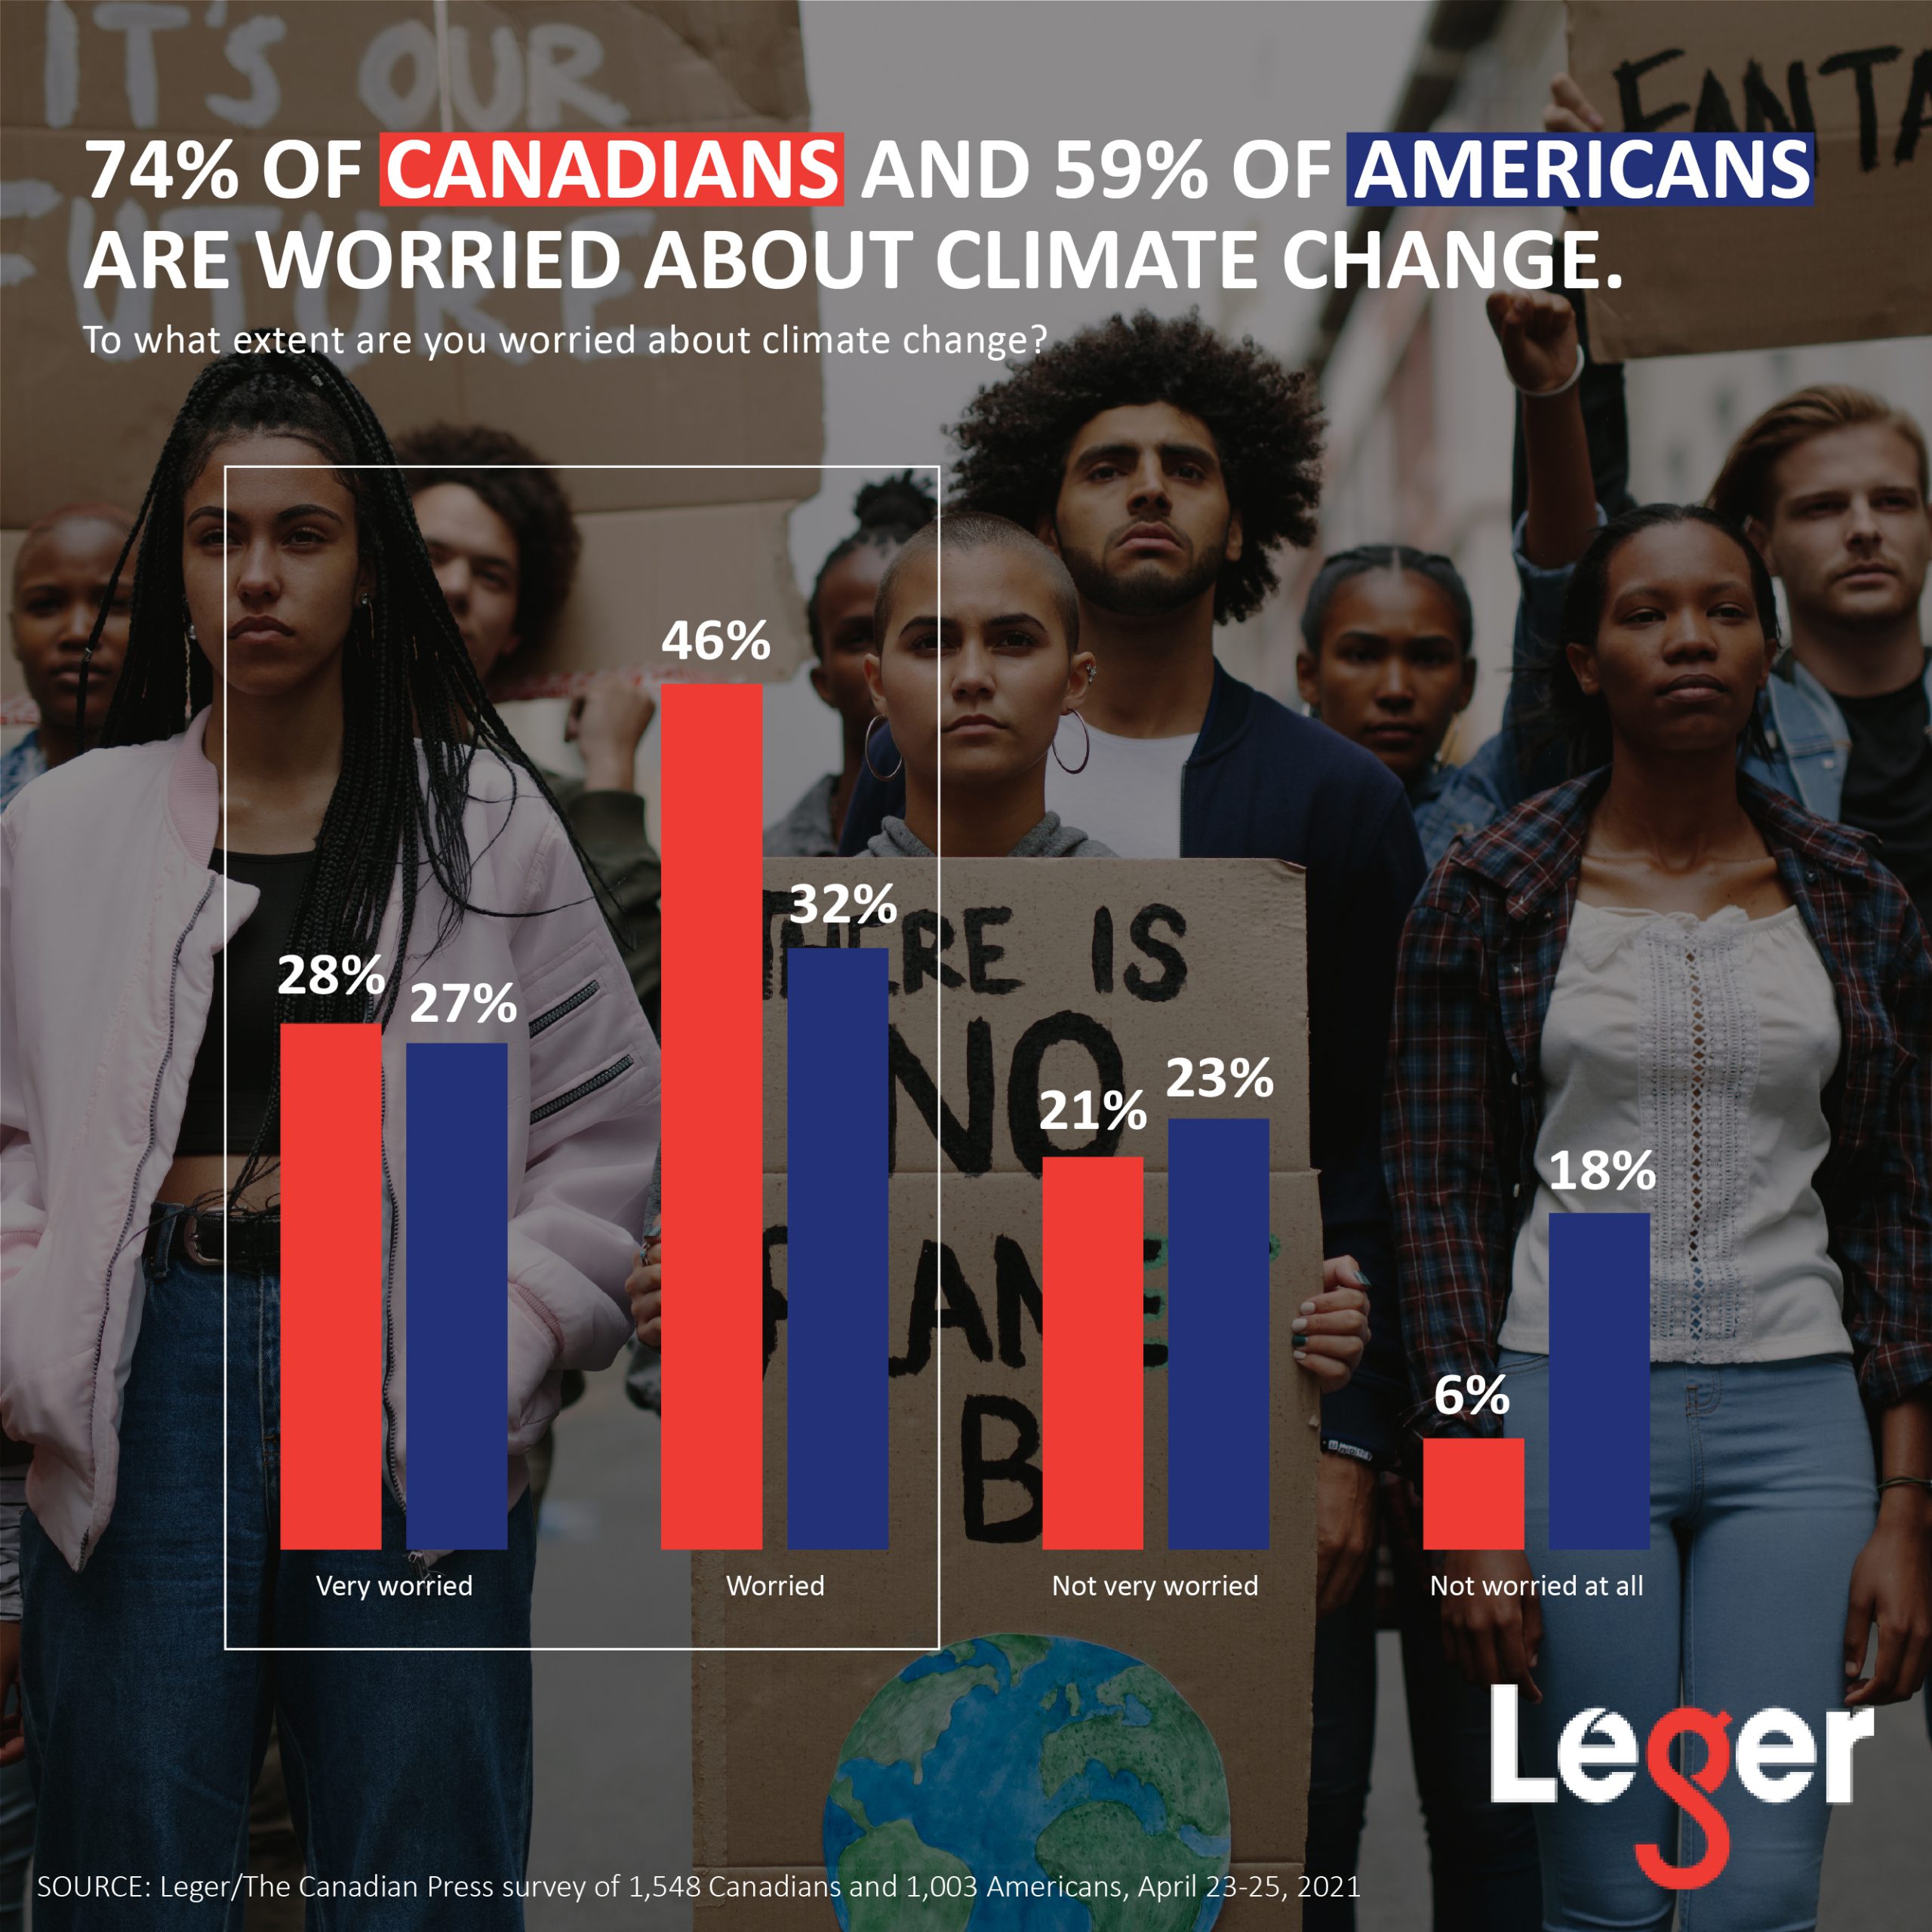 74% of Canadians and 59% of Americans are worried about climate change.